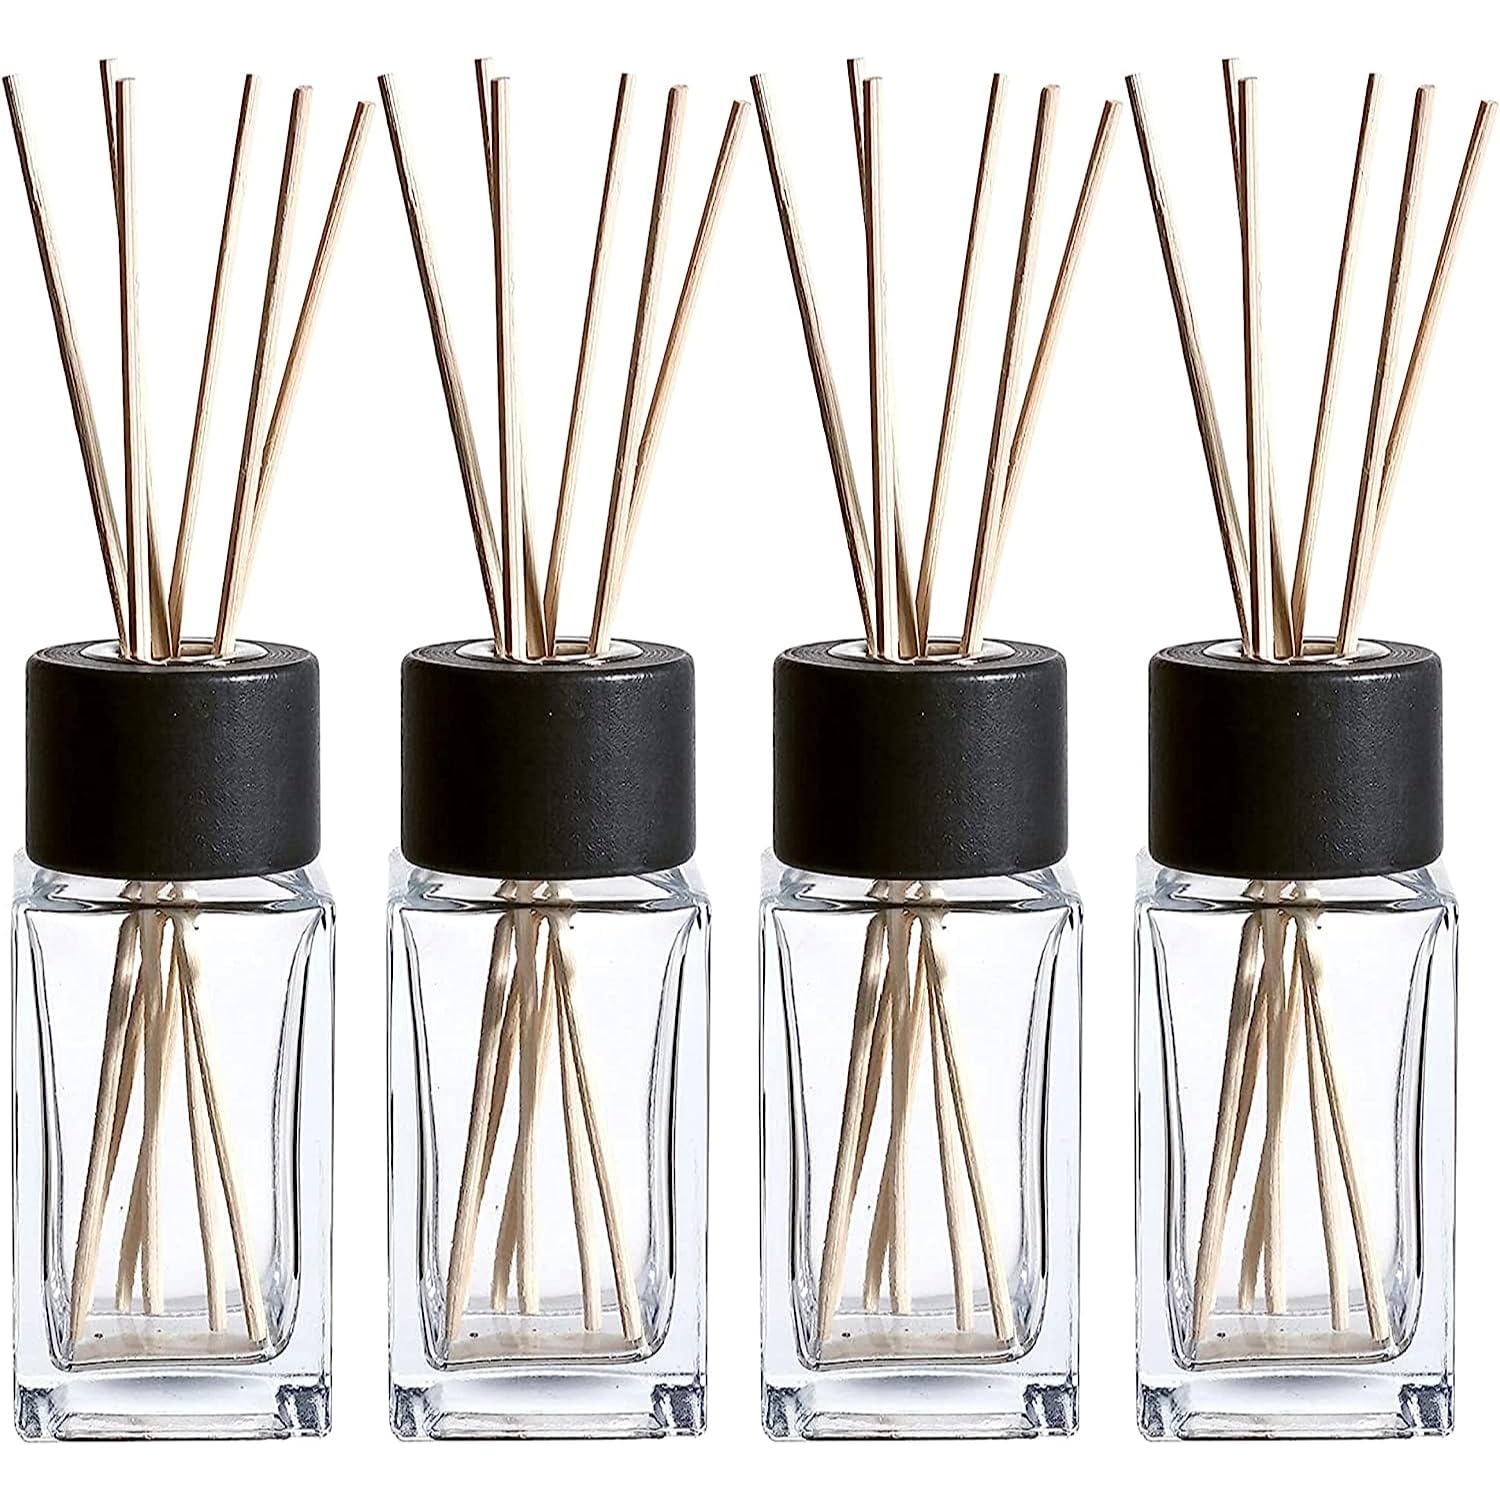 WHOLE HOUSEWARES Natural Diffuser Reeds Bottles Sticks | Clear Glass Home Dcor for Kitchen and Living Room | Black Wood Caps | Dcorative Fragrance Set with Long Lasting Aroma - Set of 4